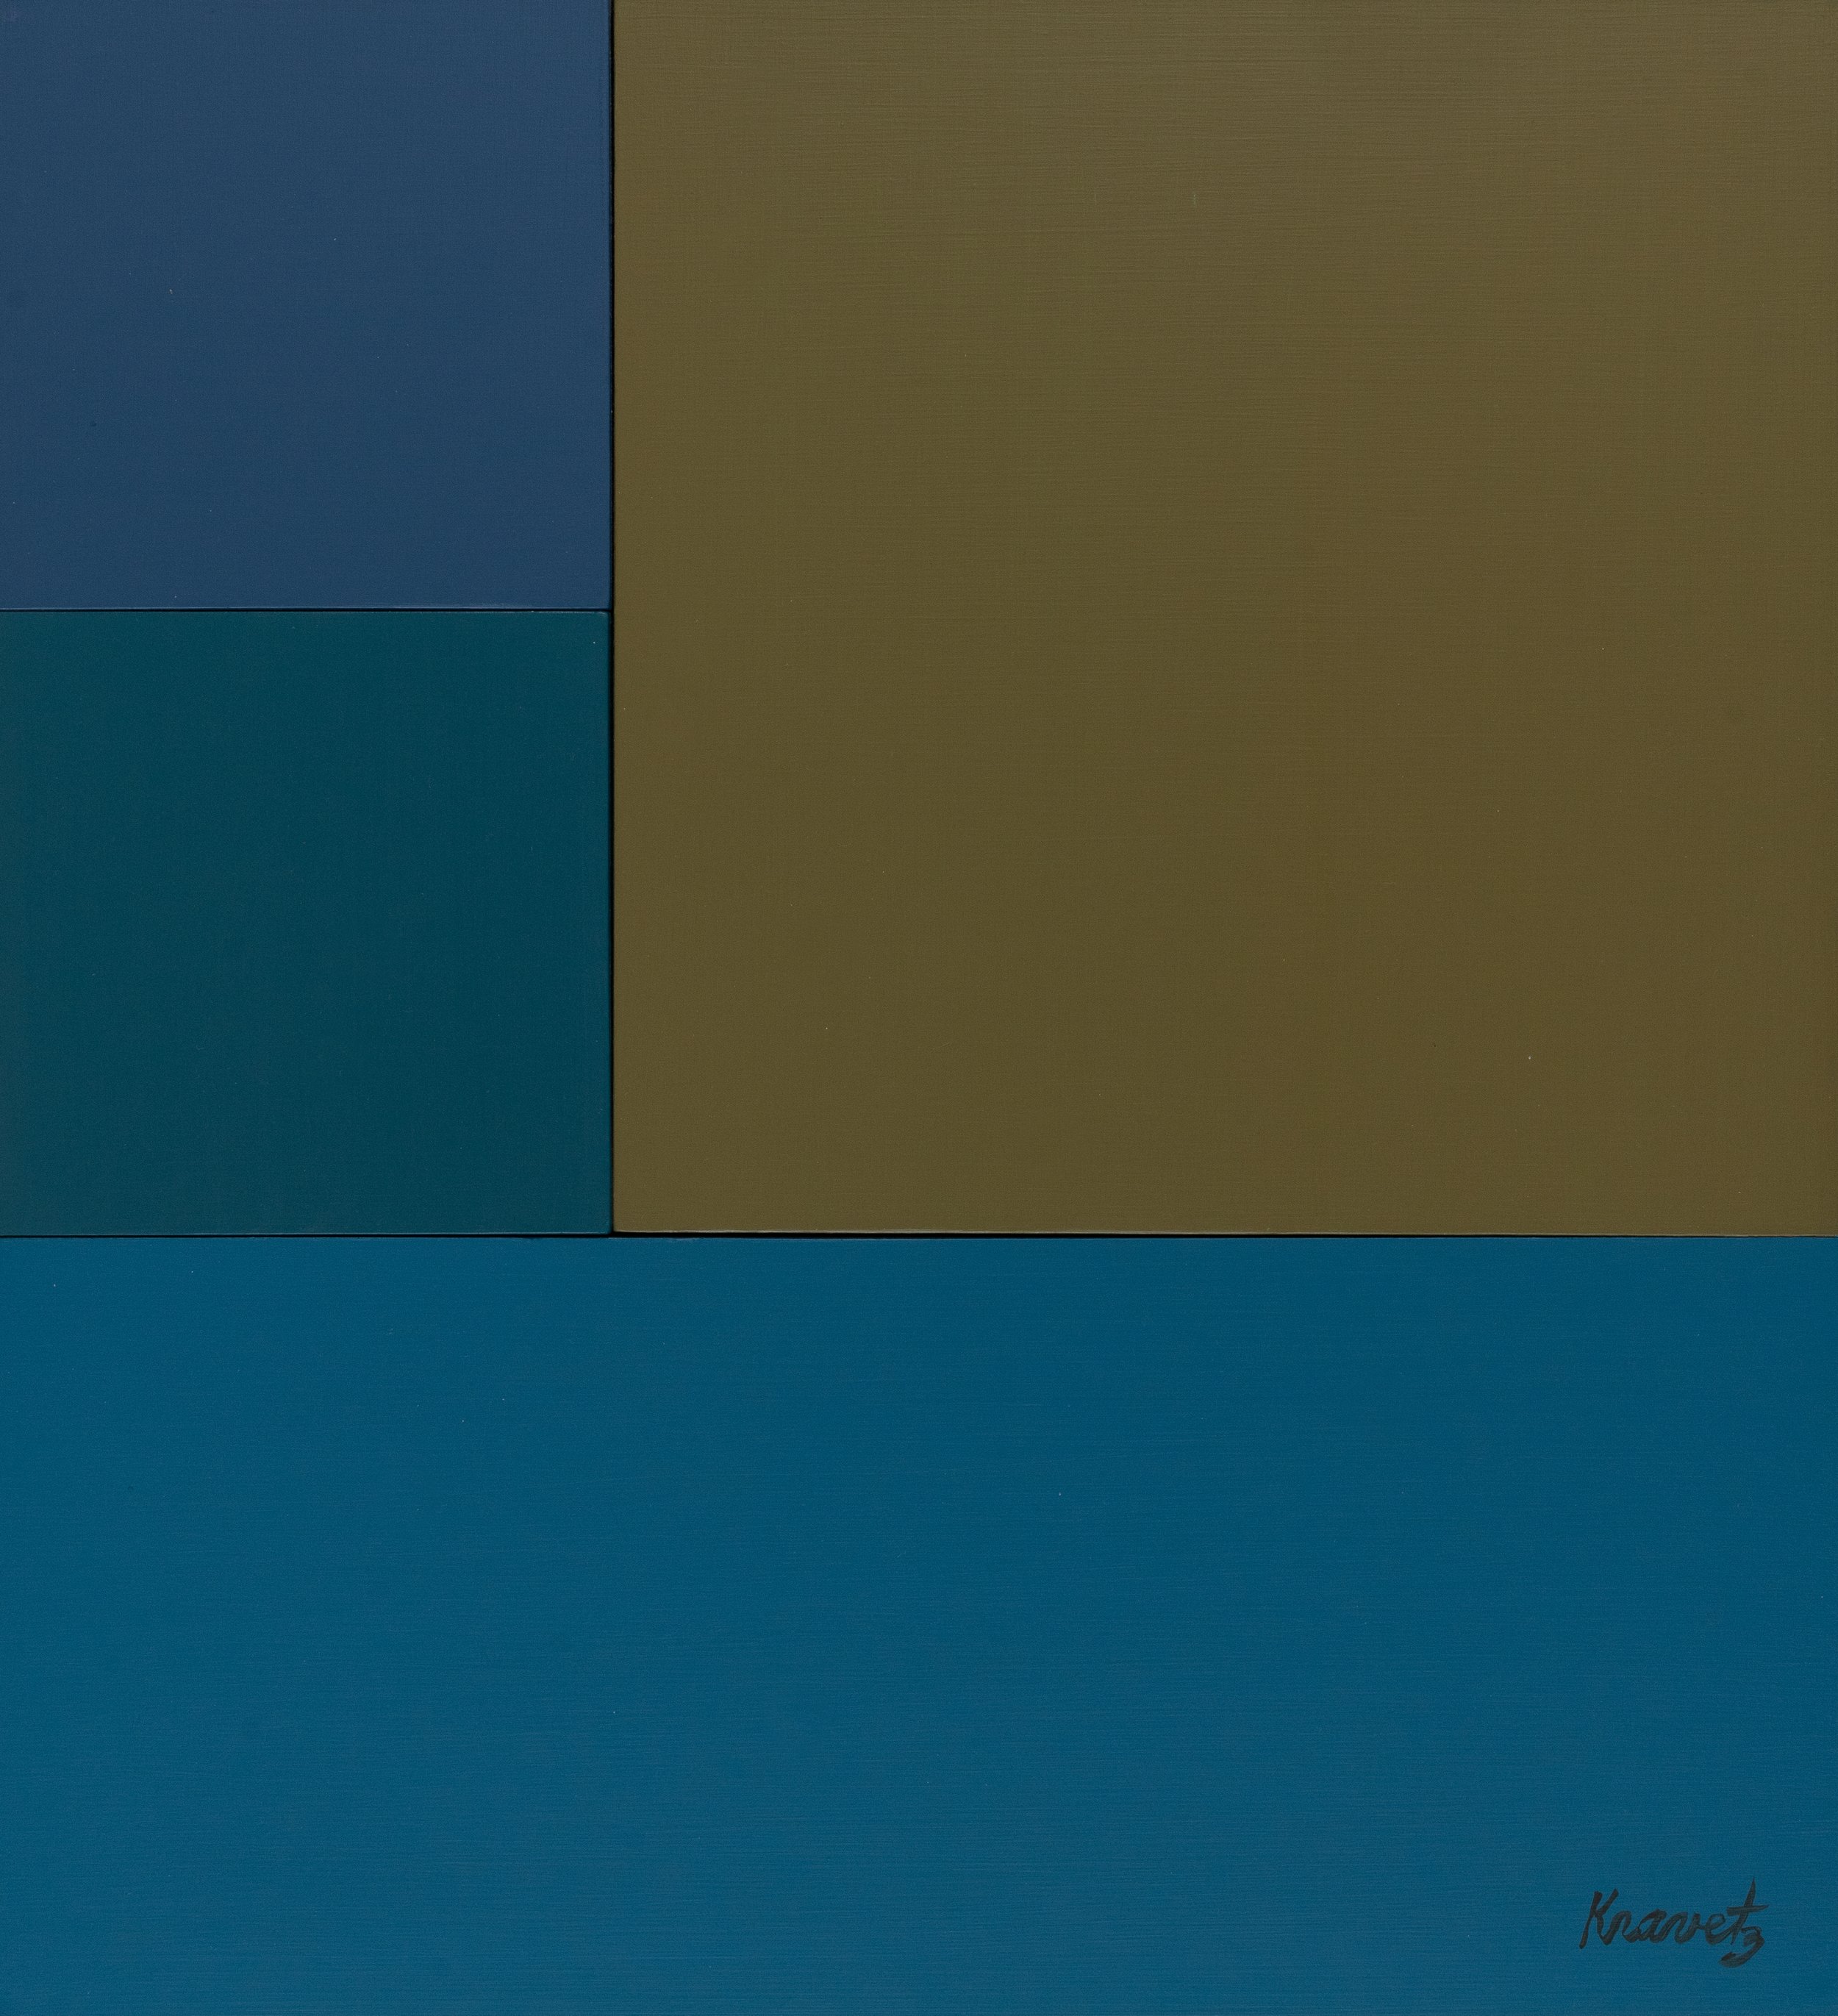 Construction with Four Colors, 1974, acrylic on masonite, 19.5x18 inches